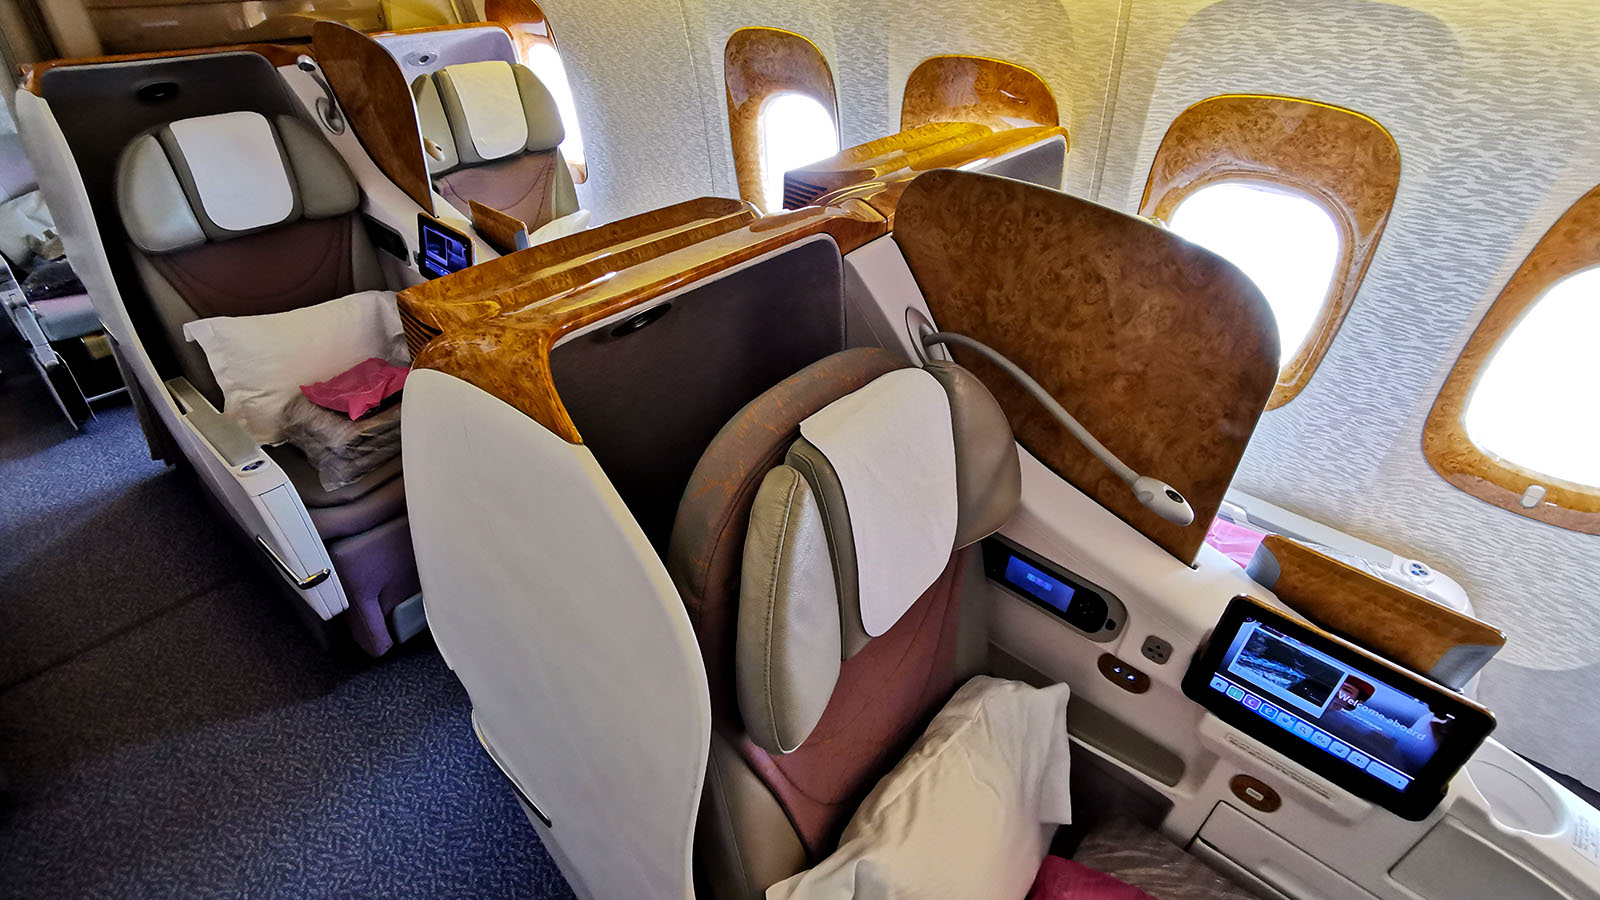 Chairs in Emirates Boeing 777 Business Class